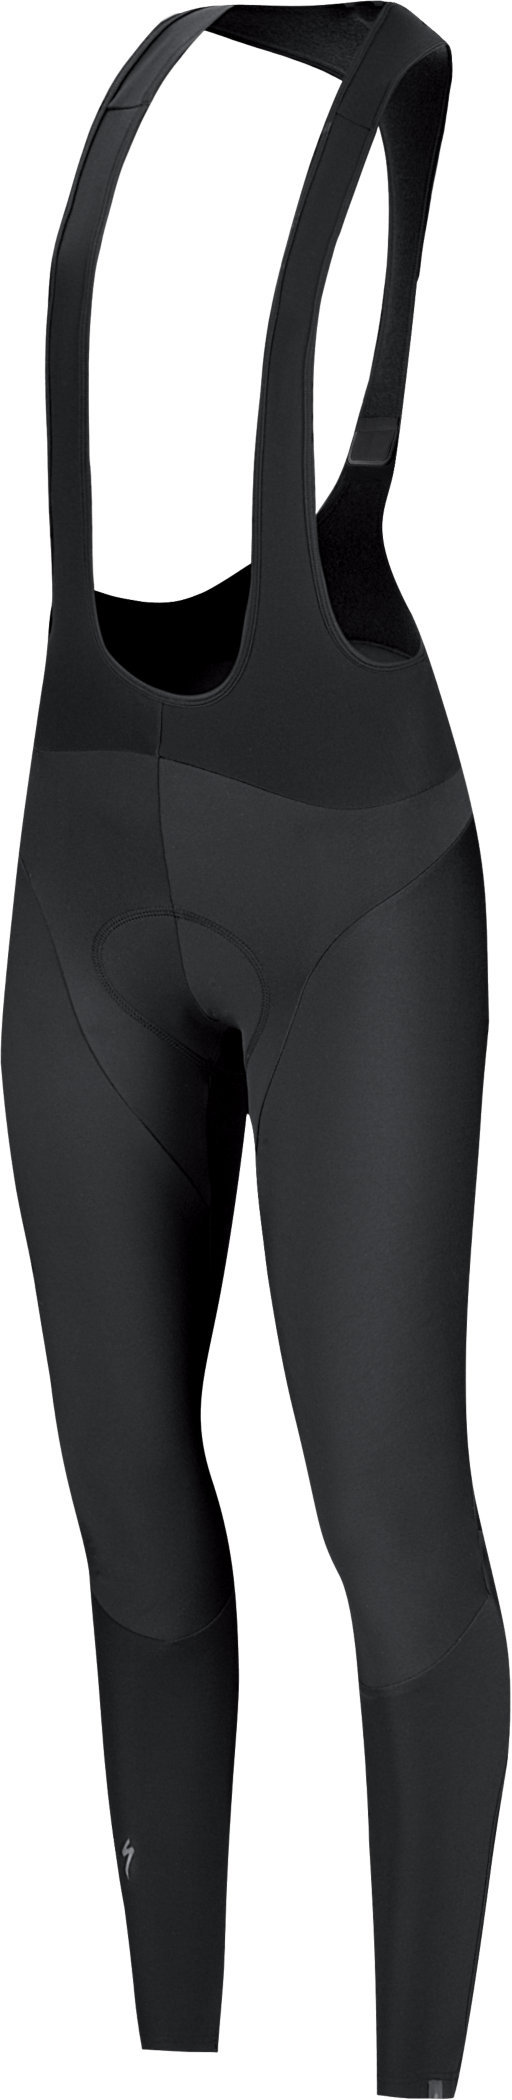 Collant Specialized 21 Element RBX Comp Women’s Cycling Bib Tight noir M